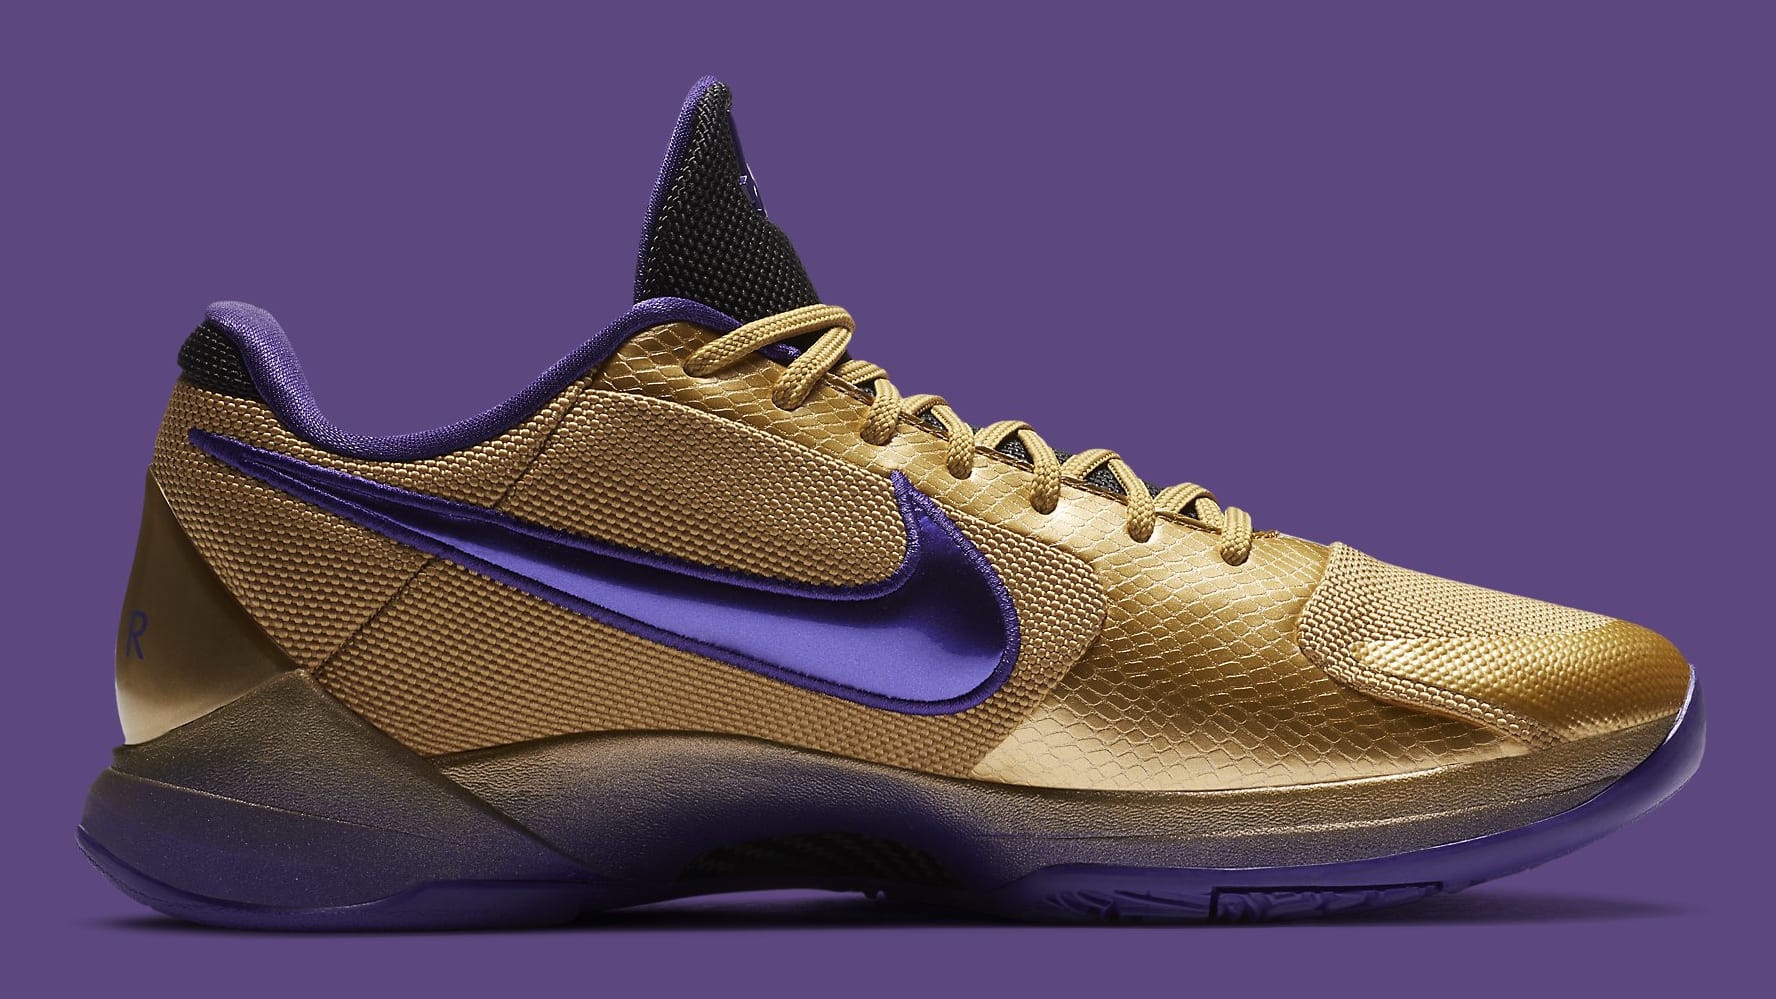 Undefeated x Nike Kobe 5 Gold Hall of Fame Release date DA6809-700 Medial